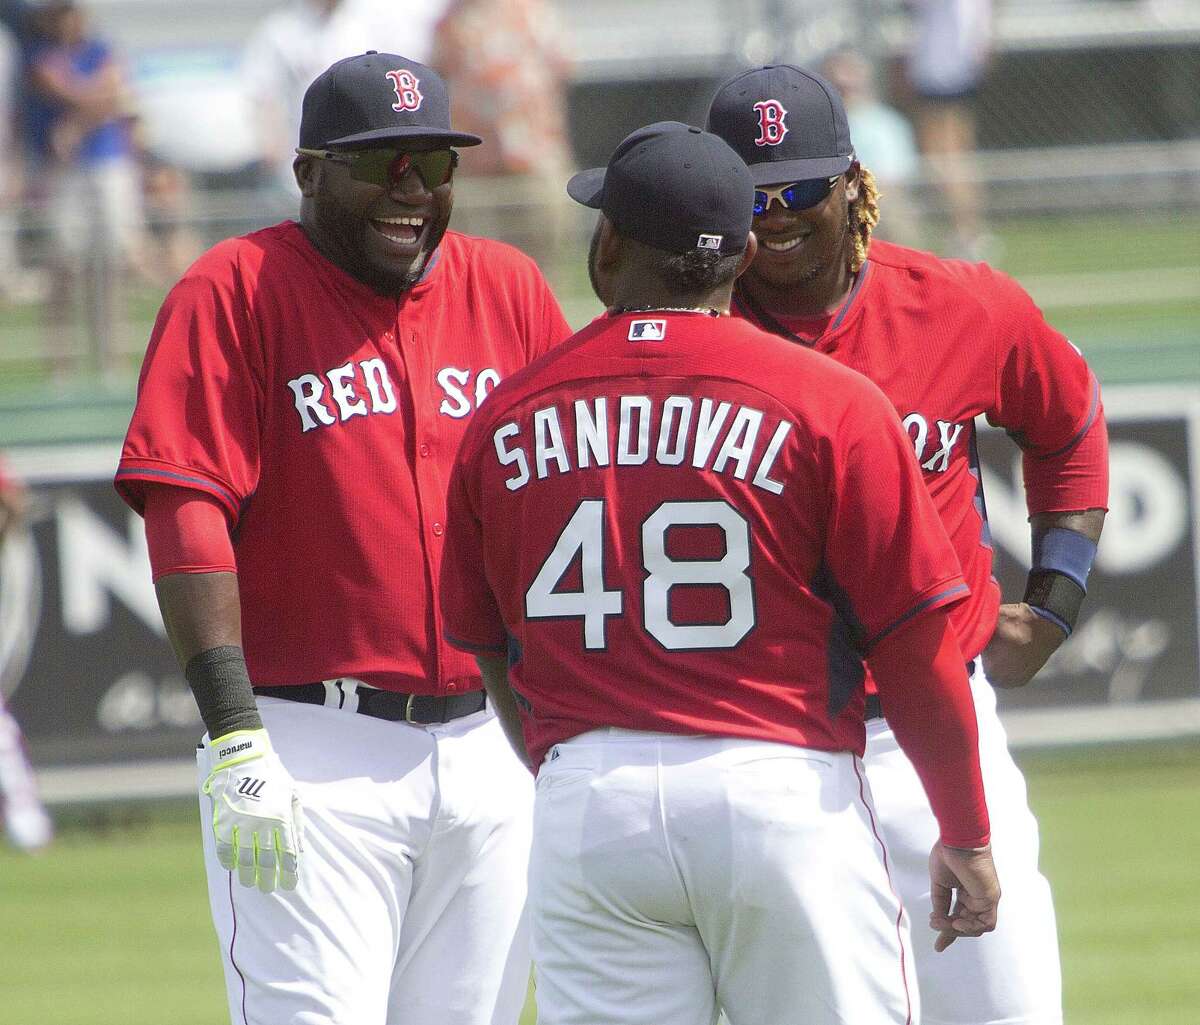 From left, David Ortiz, Pablo Sandoval and Hanley Ramirez will look to the lead the Boston Red Sox back to the playoffs.